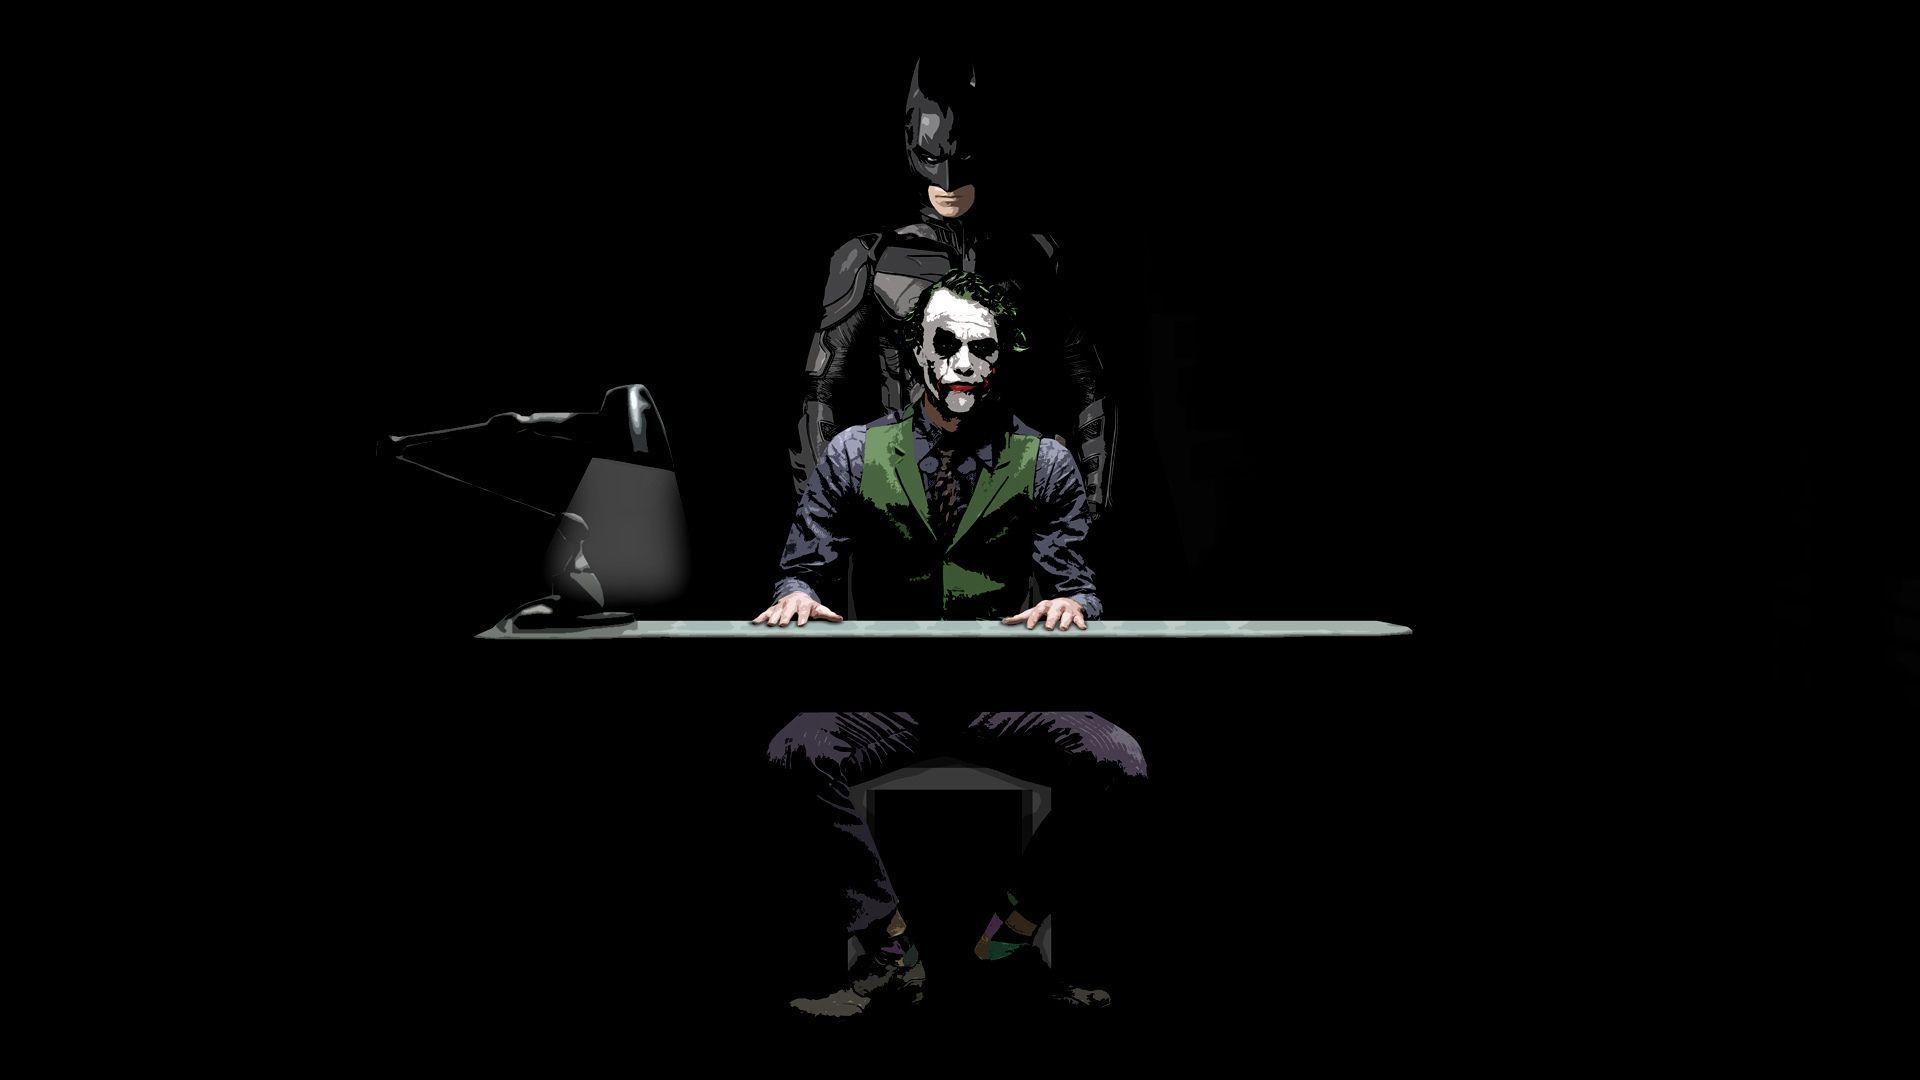 Movies: Batman And Joker Sketch, picture nr. 62132